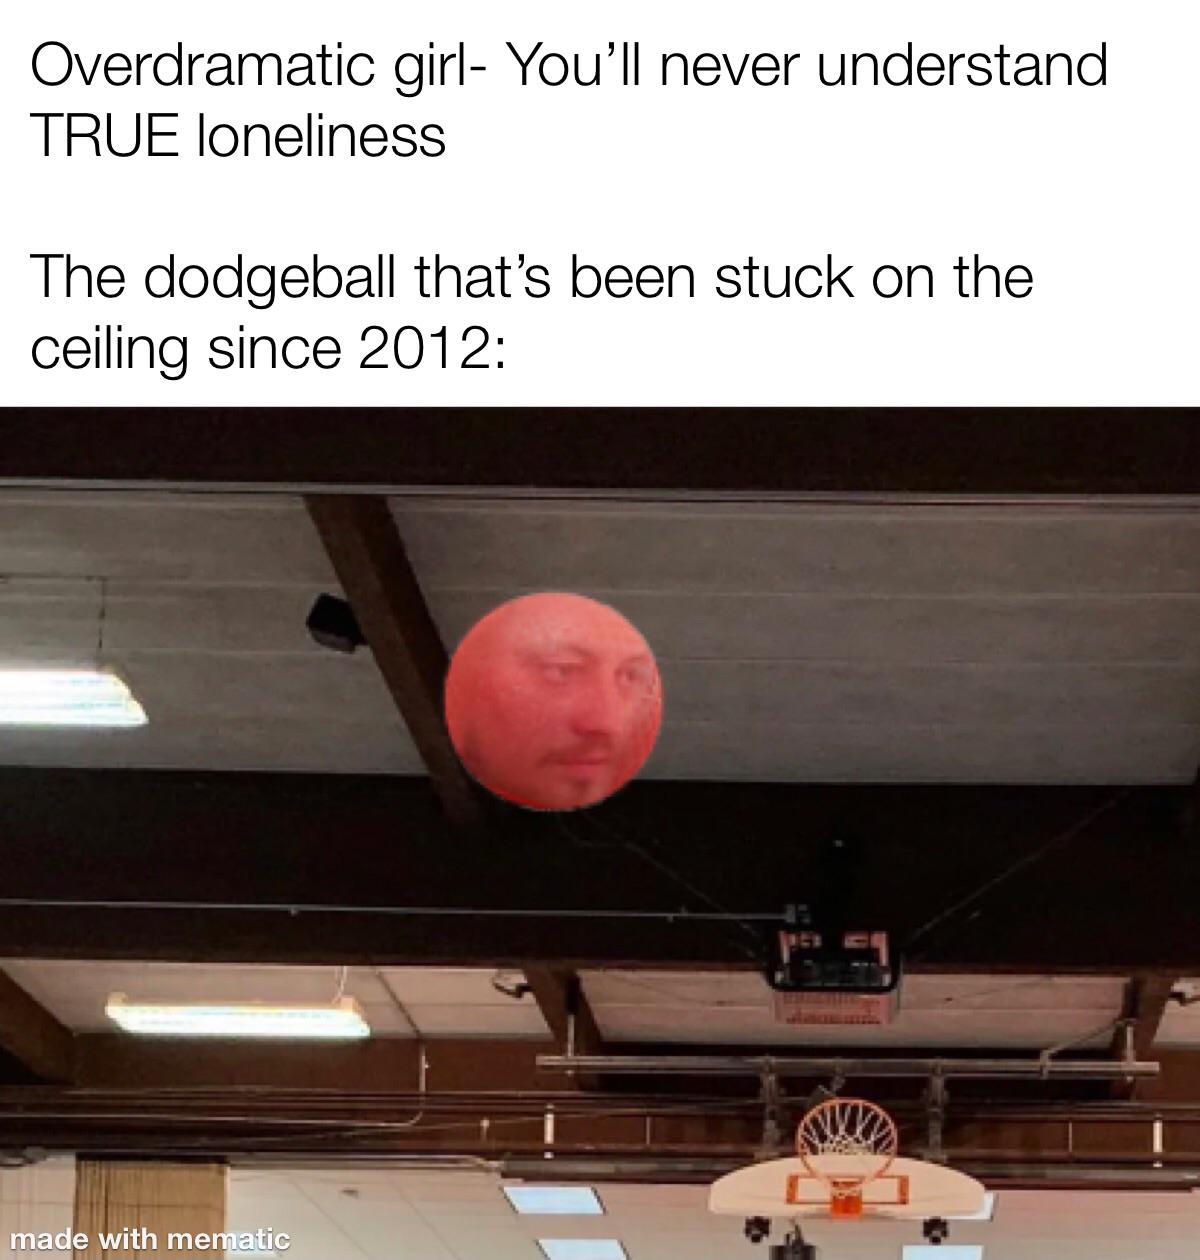 photo caption - Overdramatic girl You'll never understand True loneliness The dodgeball that's been stuck on the ceiling since 2012 made with mematic